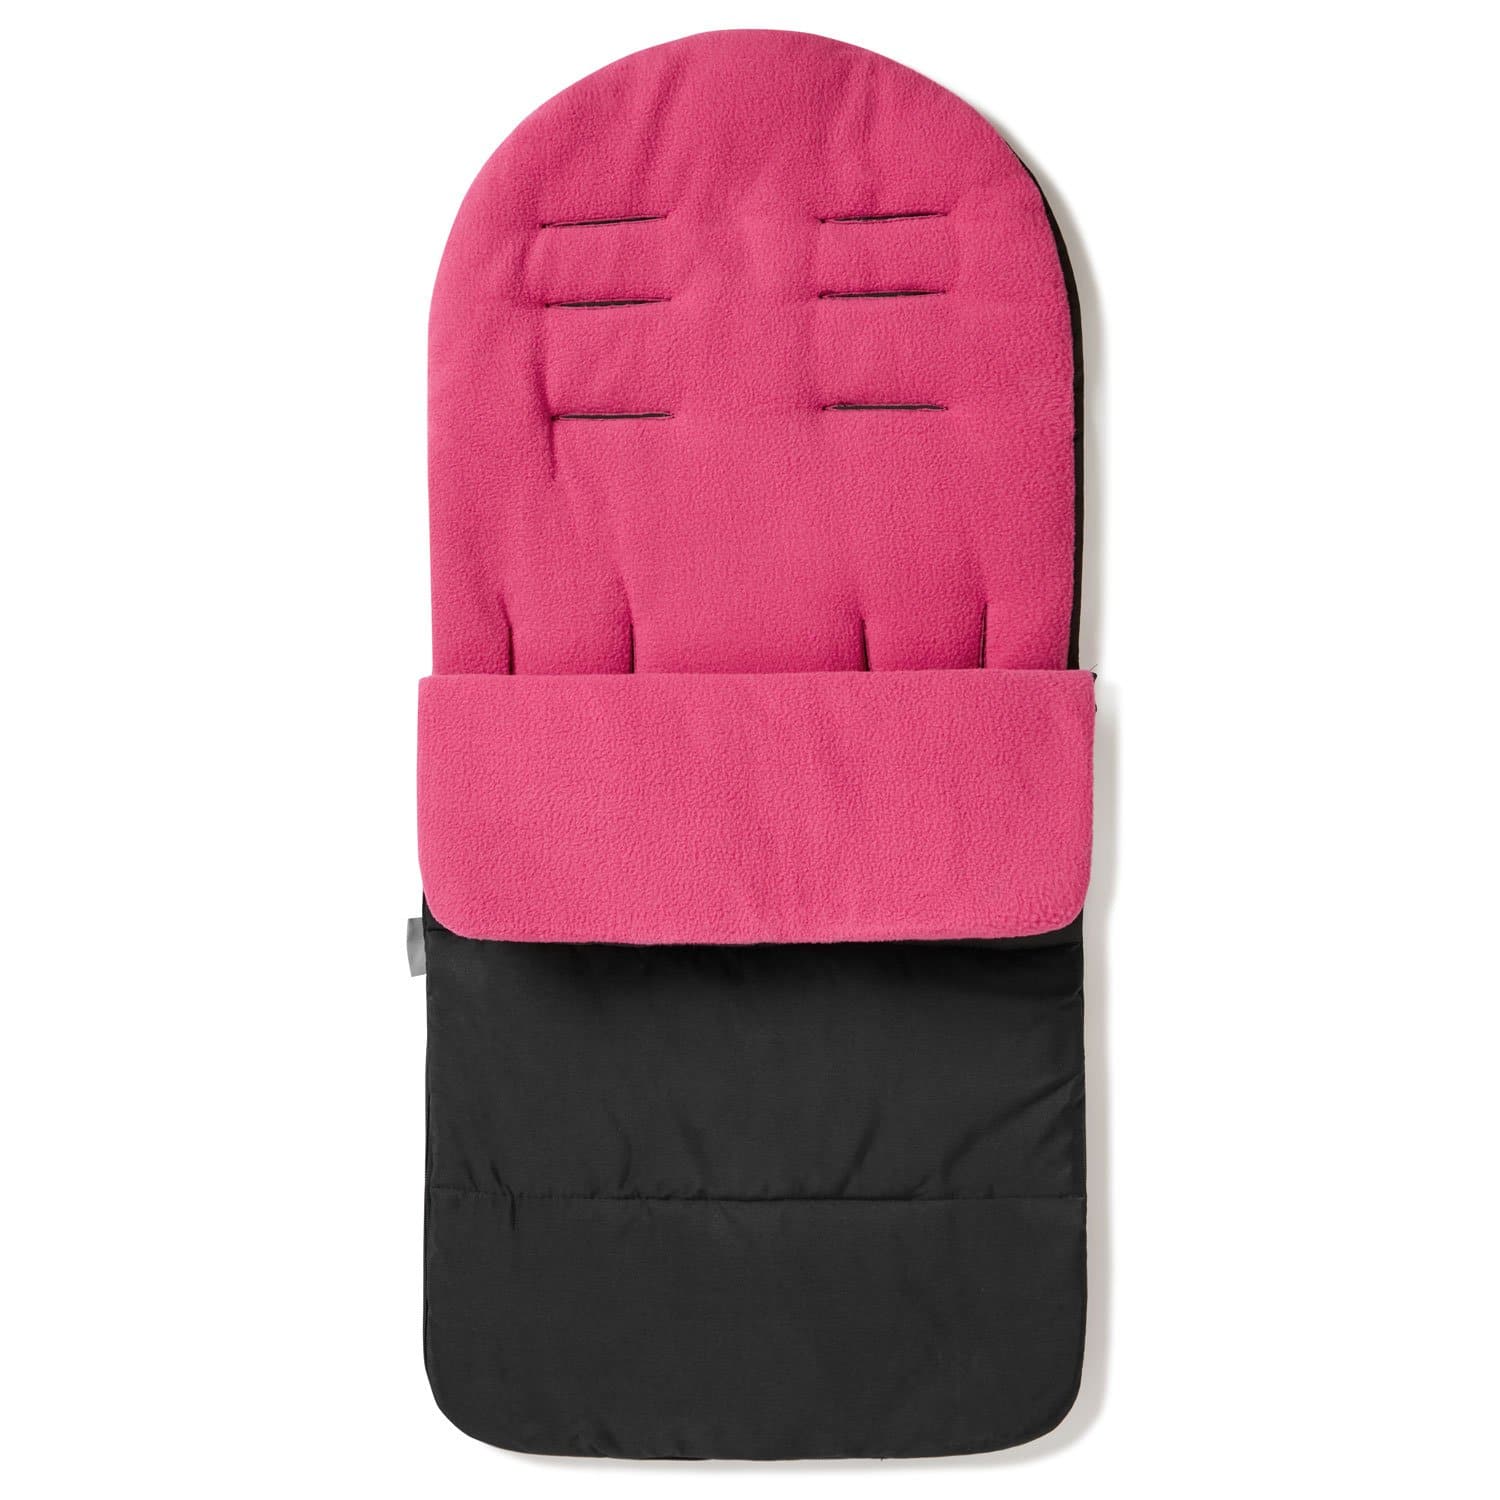 Premium Footmuff / Cosy Toes Compatible with Easywalker - Pink Rose / Fits All Models | For Your Little One